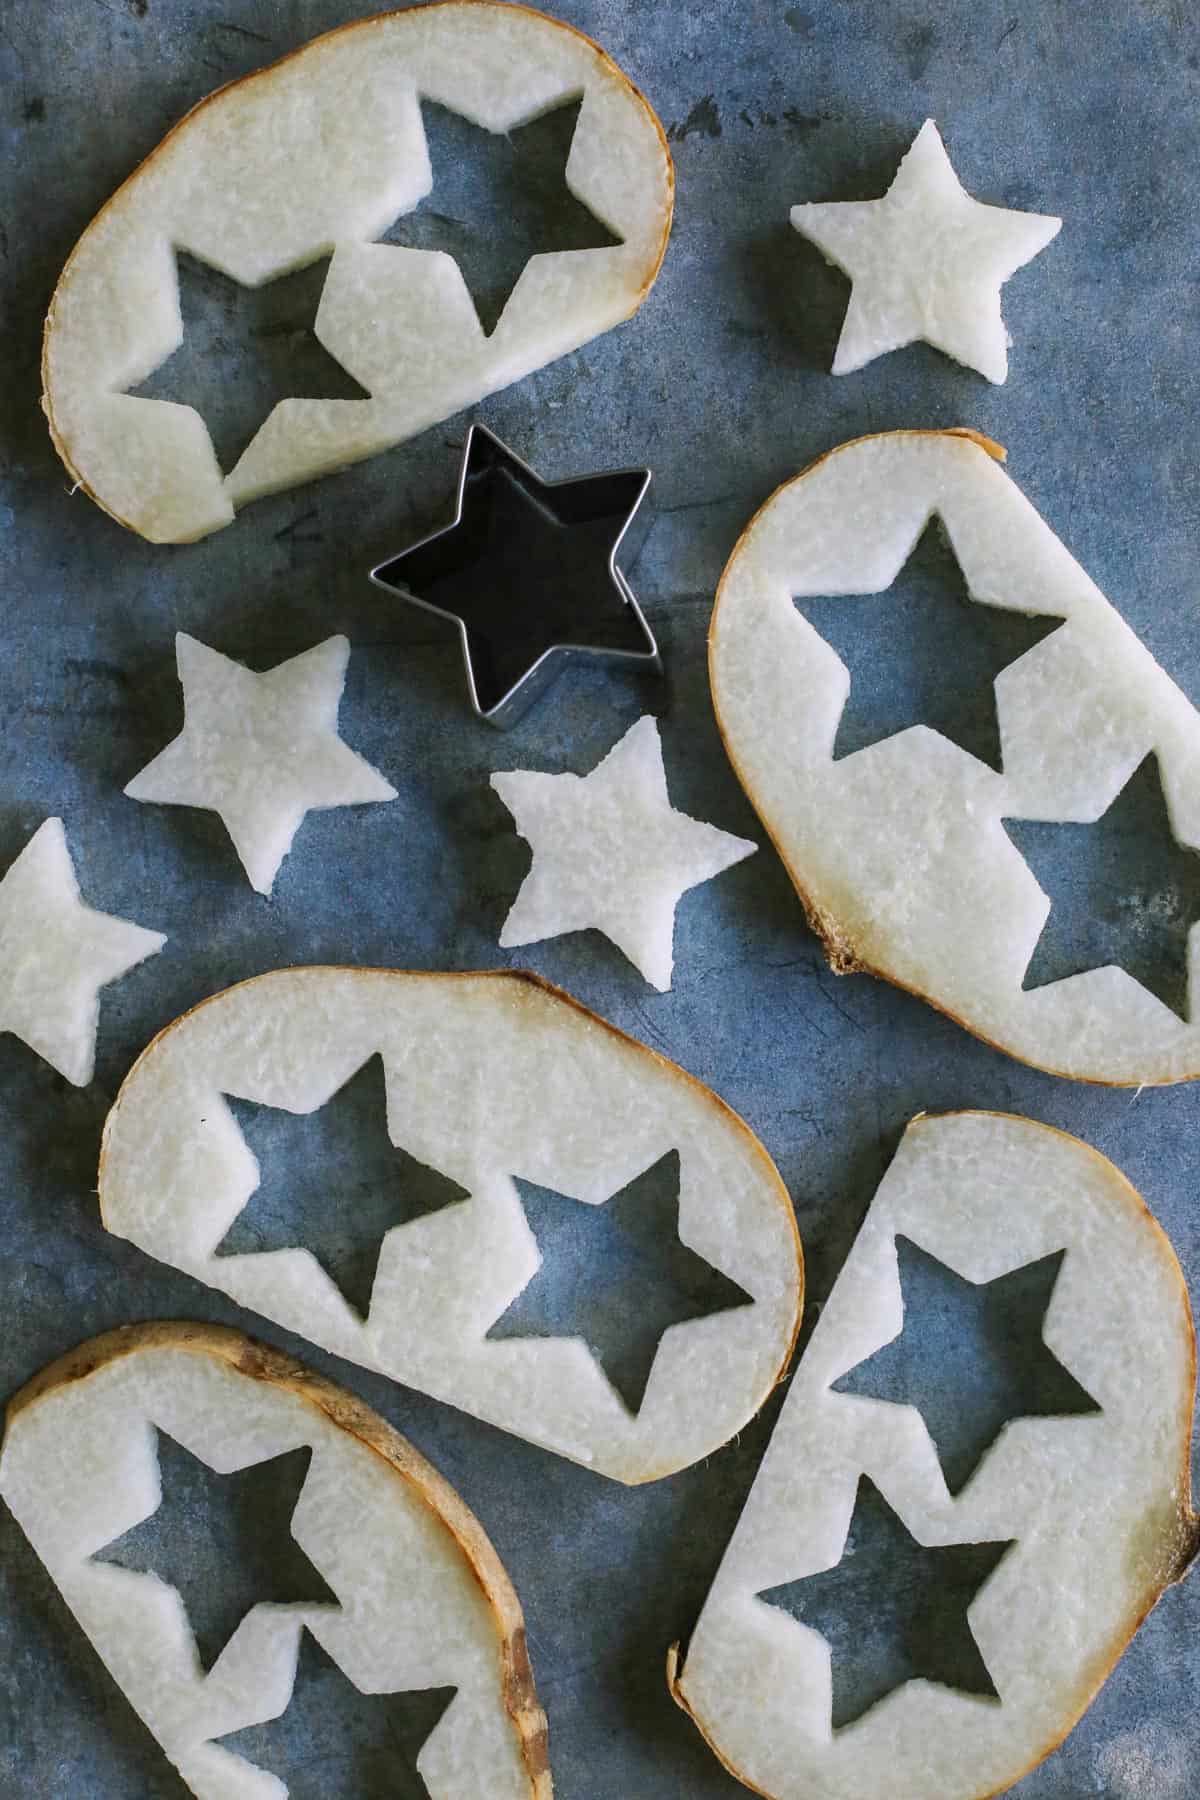 cutting out stars from slices of jicama